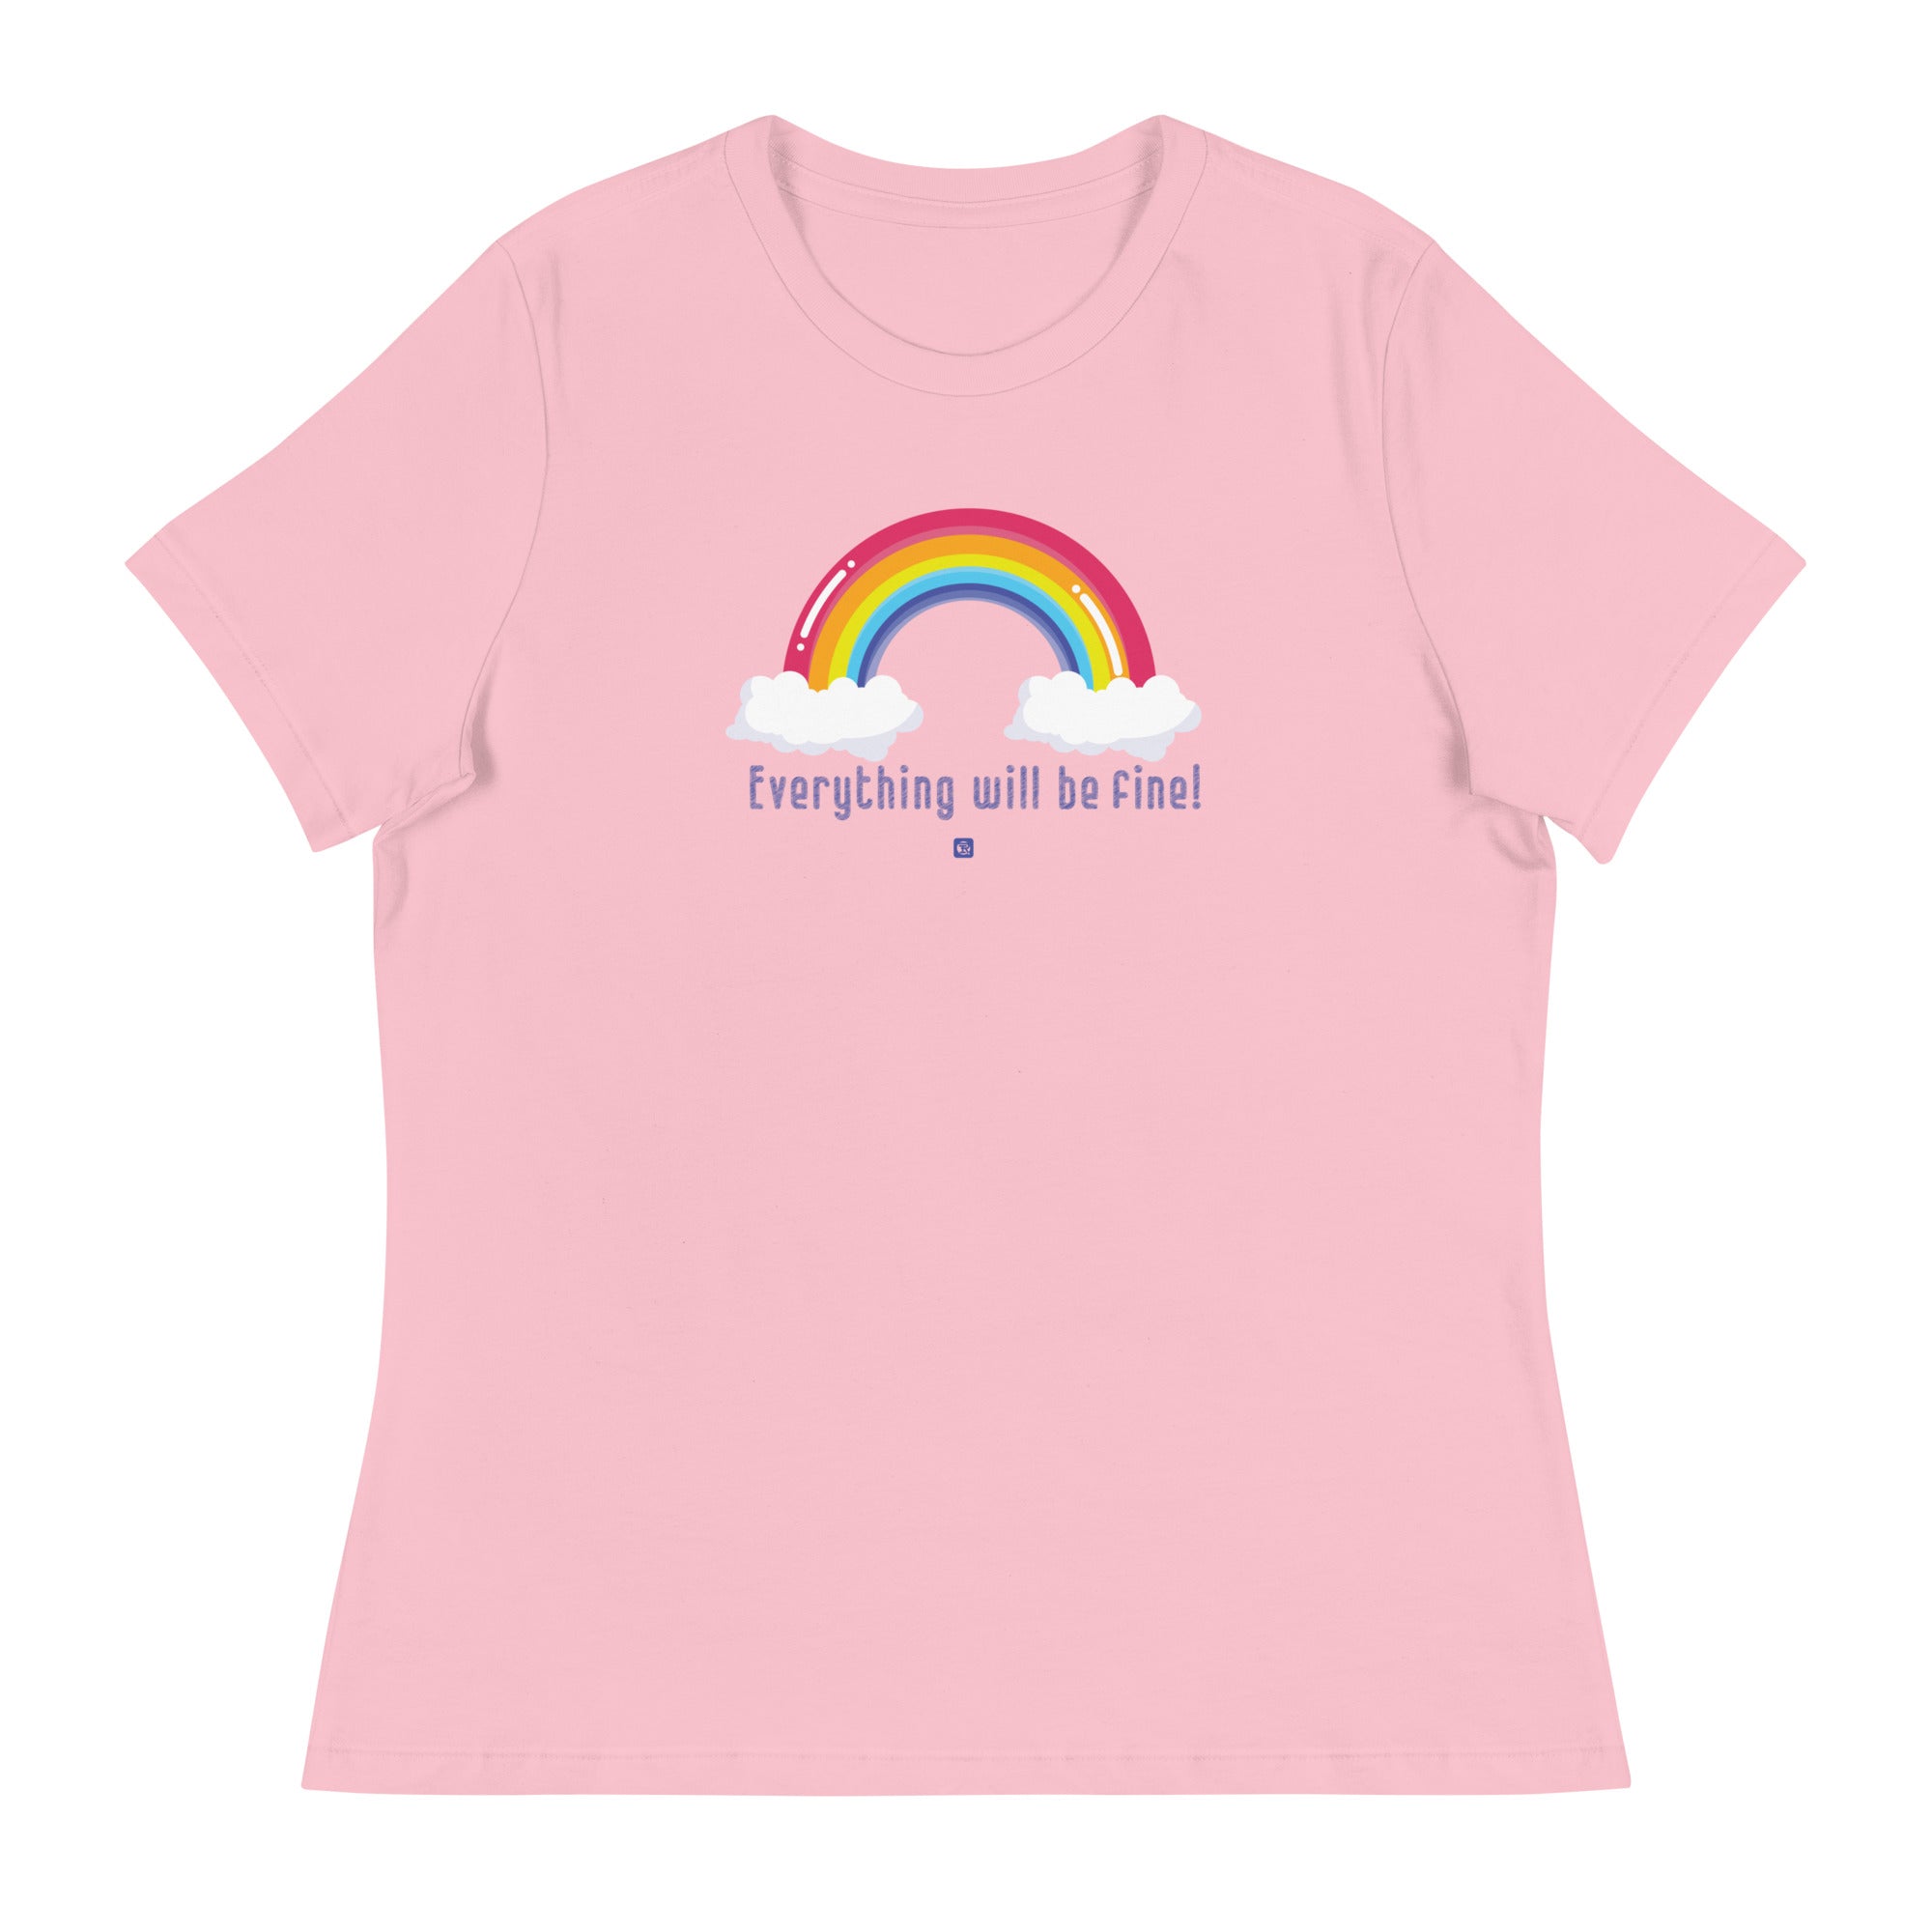 Women's “Everything Will Be Fine” T-Shirt